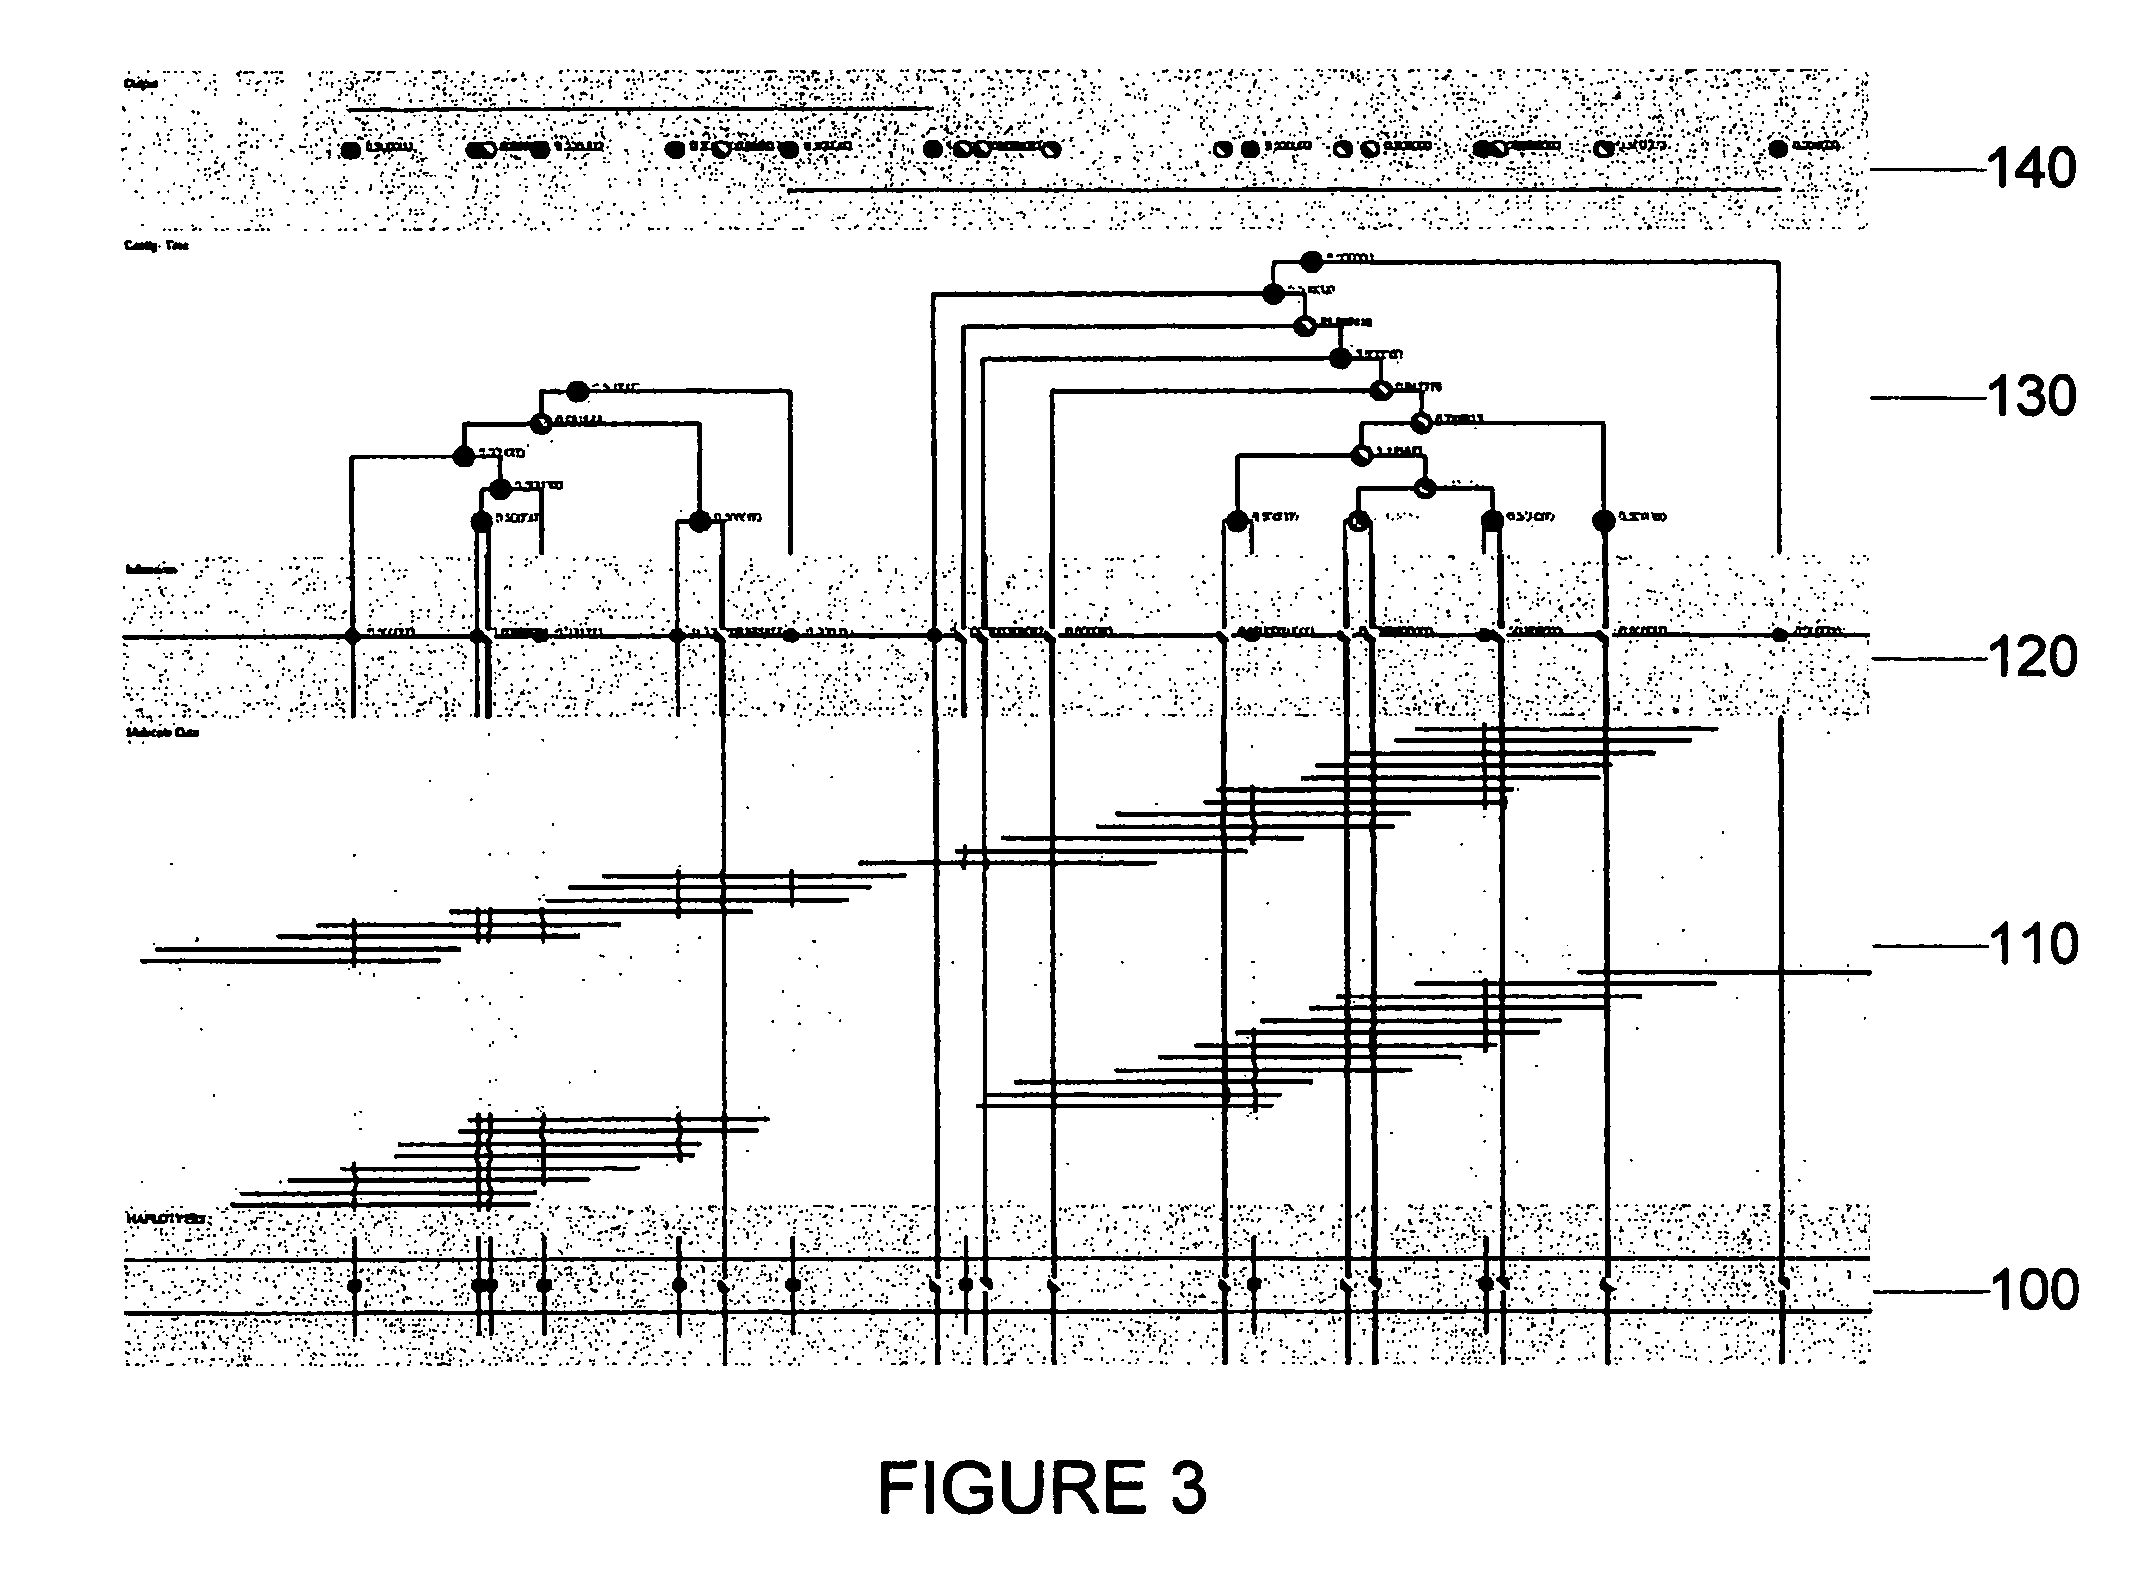 Process, software arrangement and computer-accessible medium for obtaining information associated with a haplotype